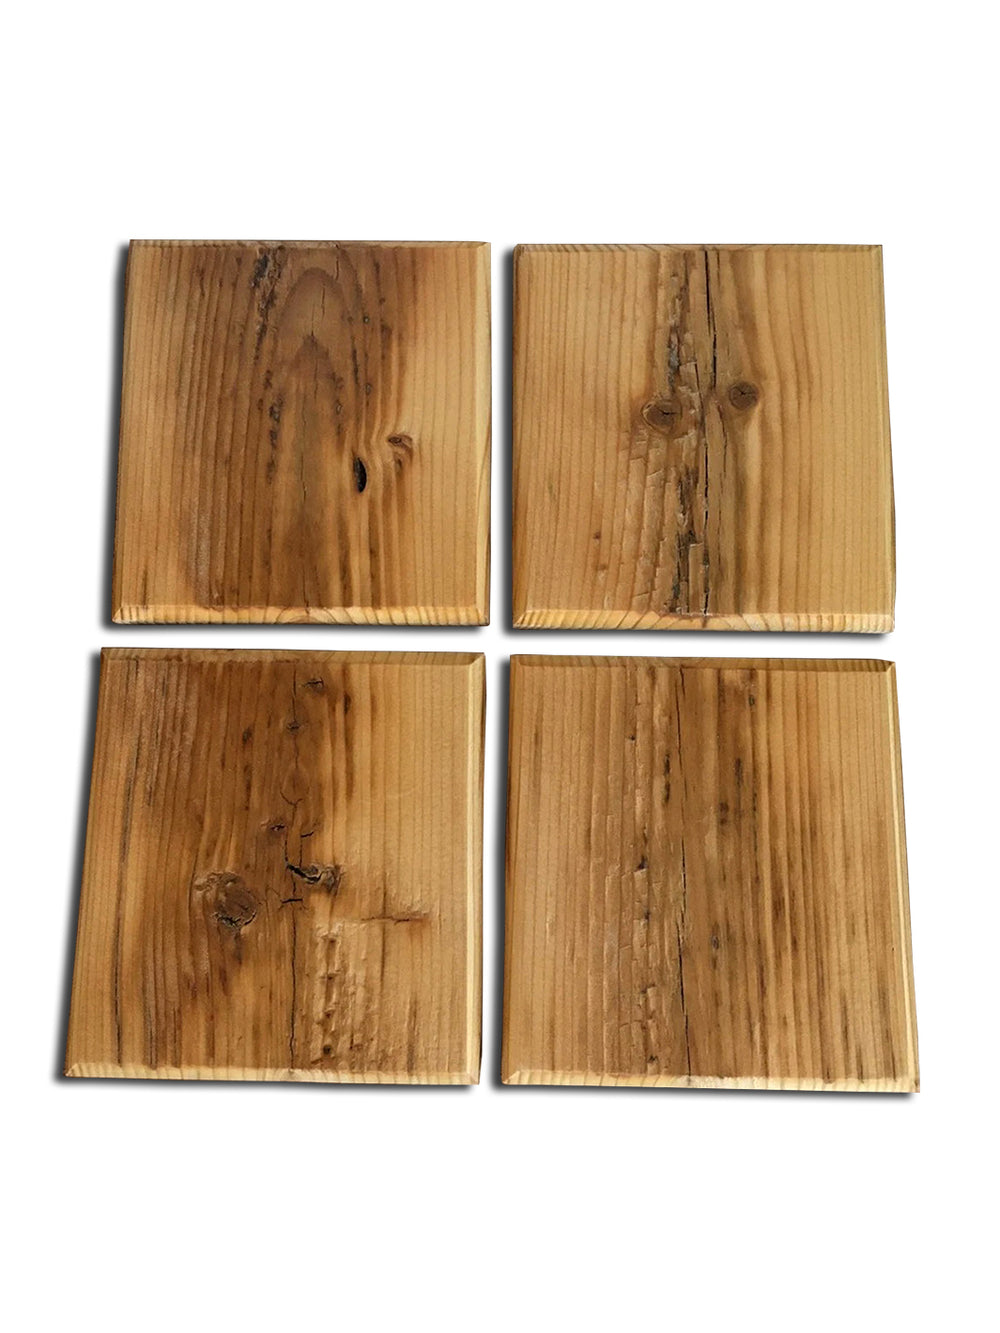 Handcrafted Reclaimed Natural Barnboard Coffee Coasters Set FTN Coasters FTN0061-1